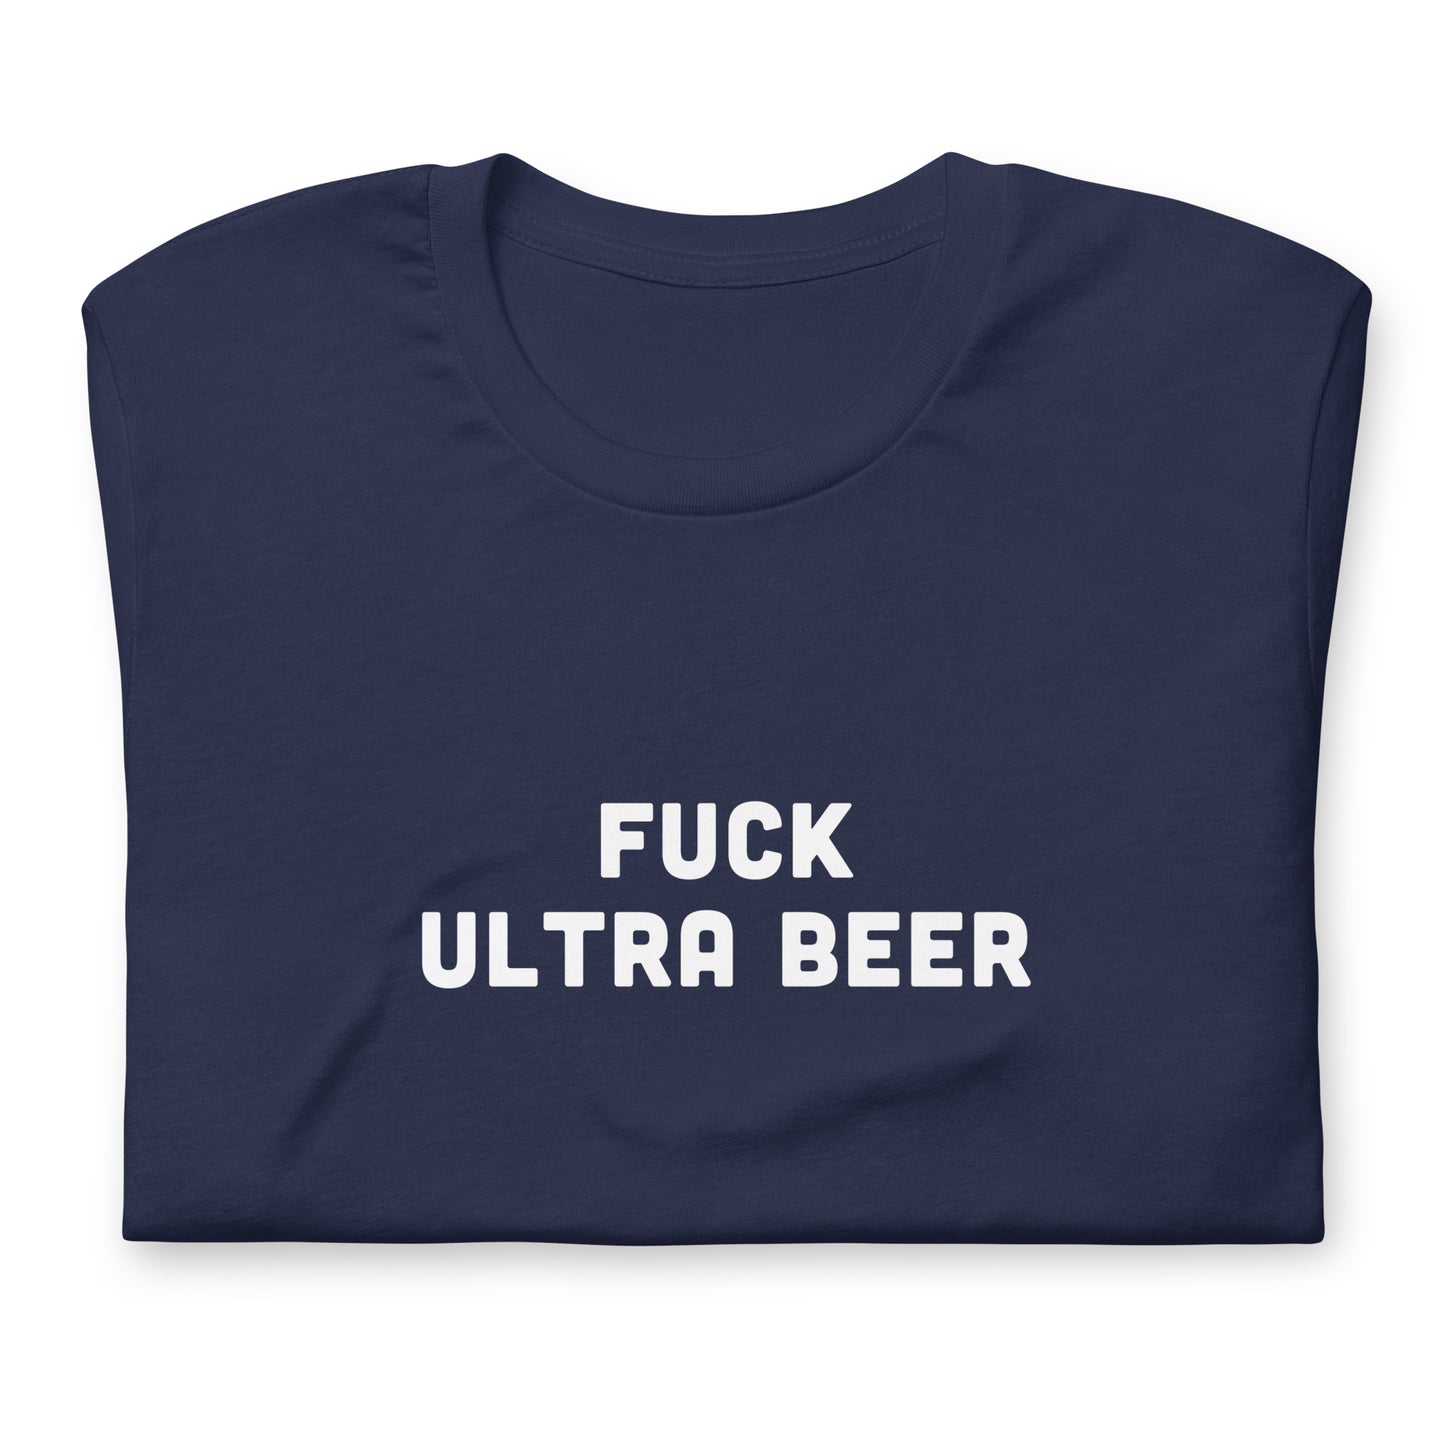 Fuck Ultra Beer T-Shirt Size XL Color Black